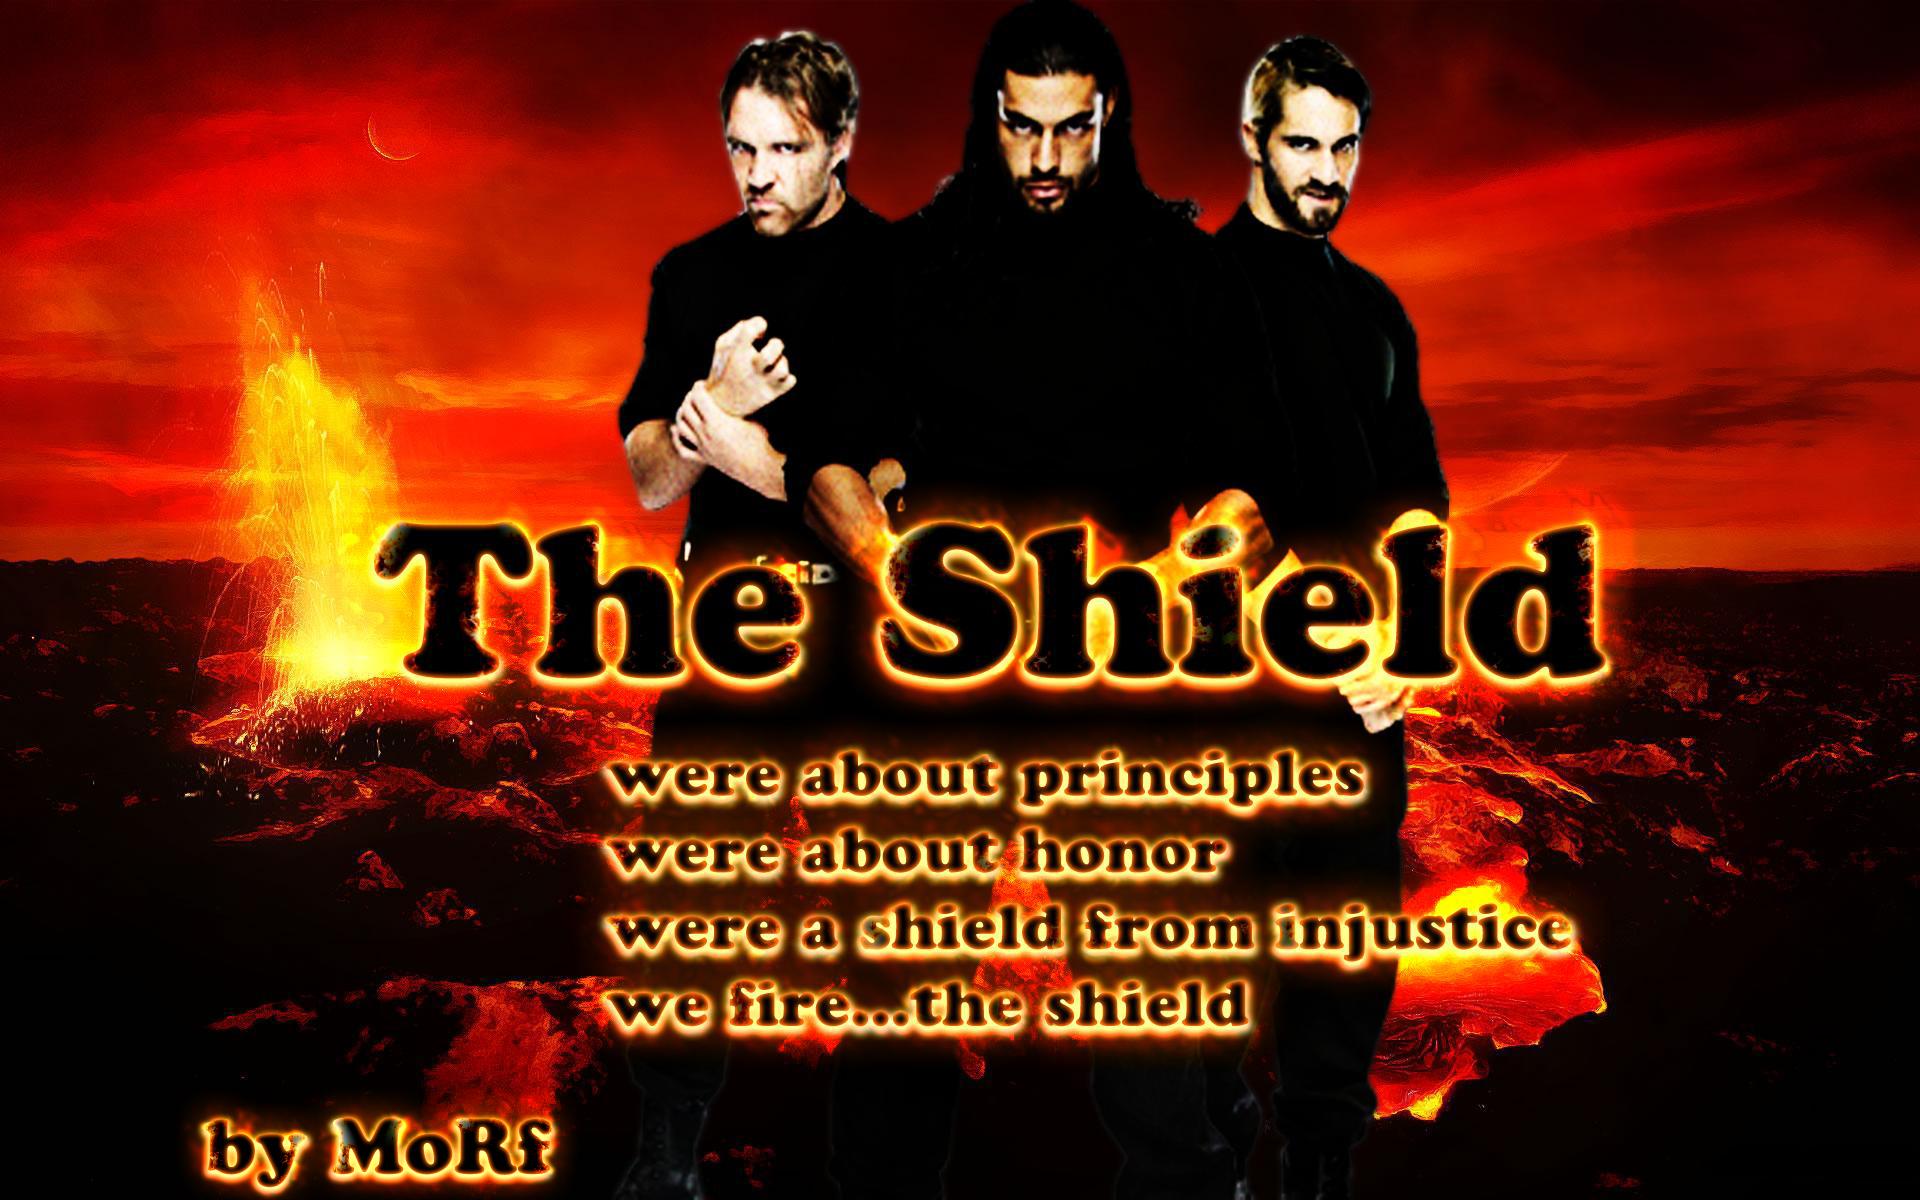 Wallpaper Of The Week: The Shield 2.0 Wallpaper | Hot Tag Wrestling